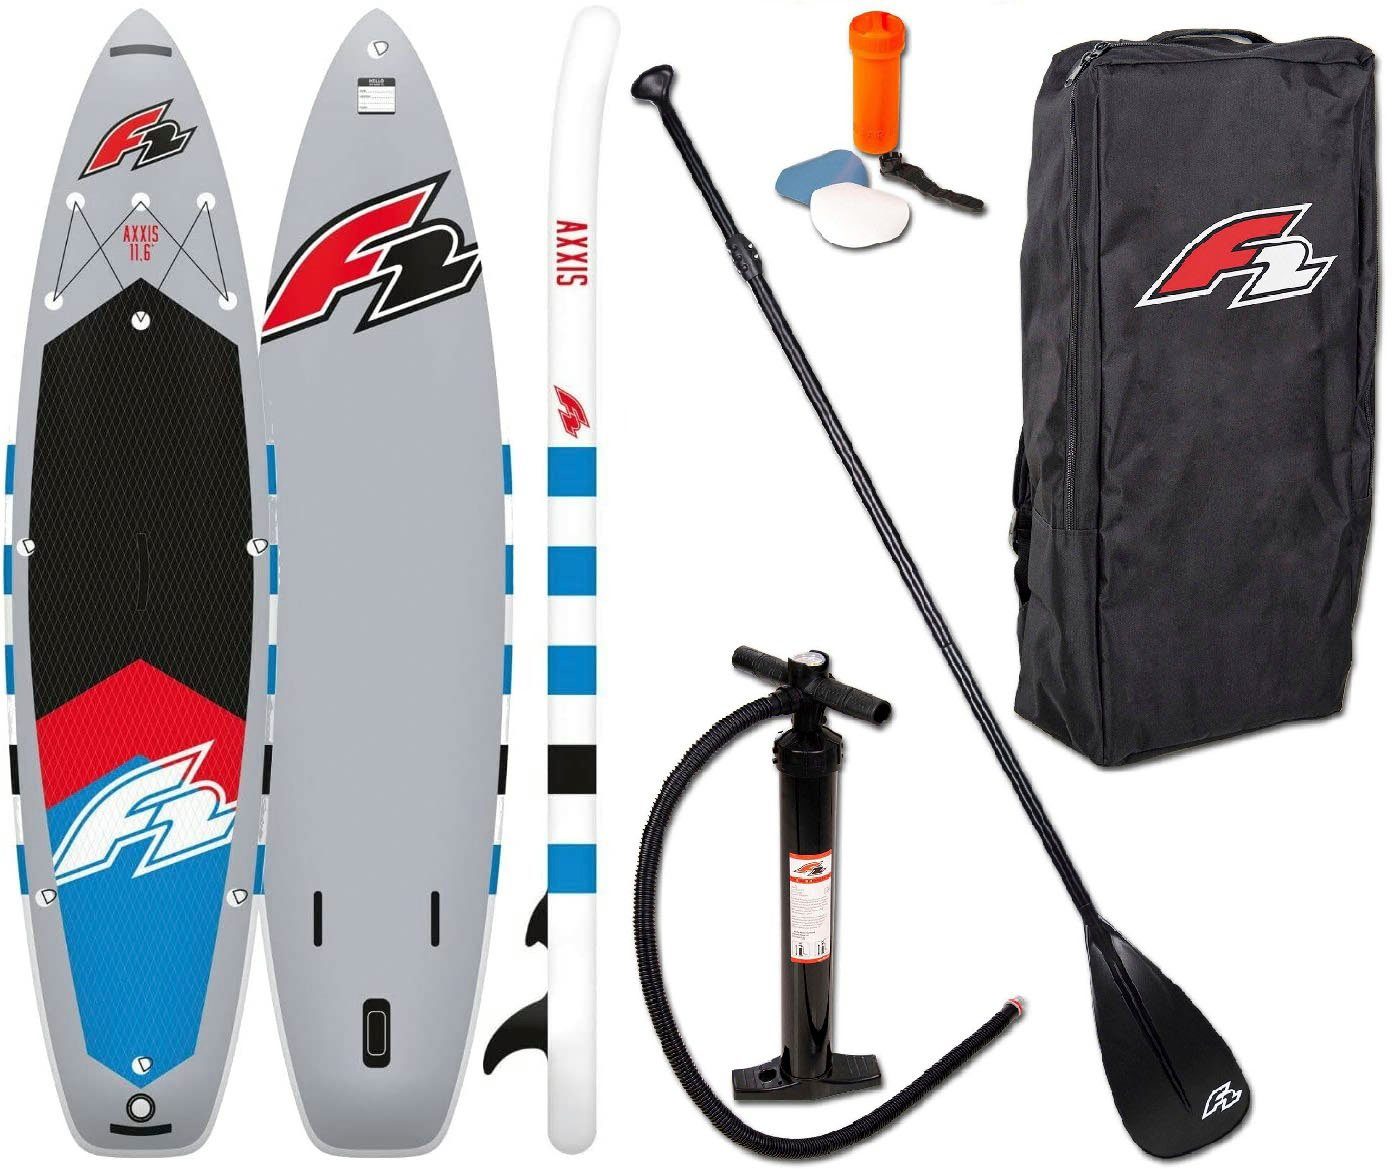 SUP-Board tlg) F2 grey, Axxis 11,6 (Packung, Inflatable 5